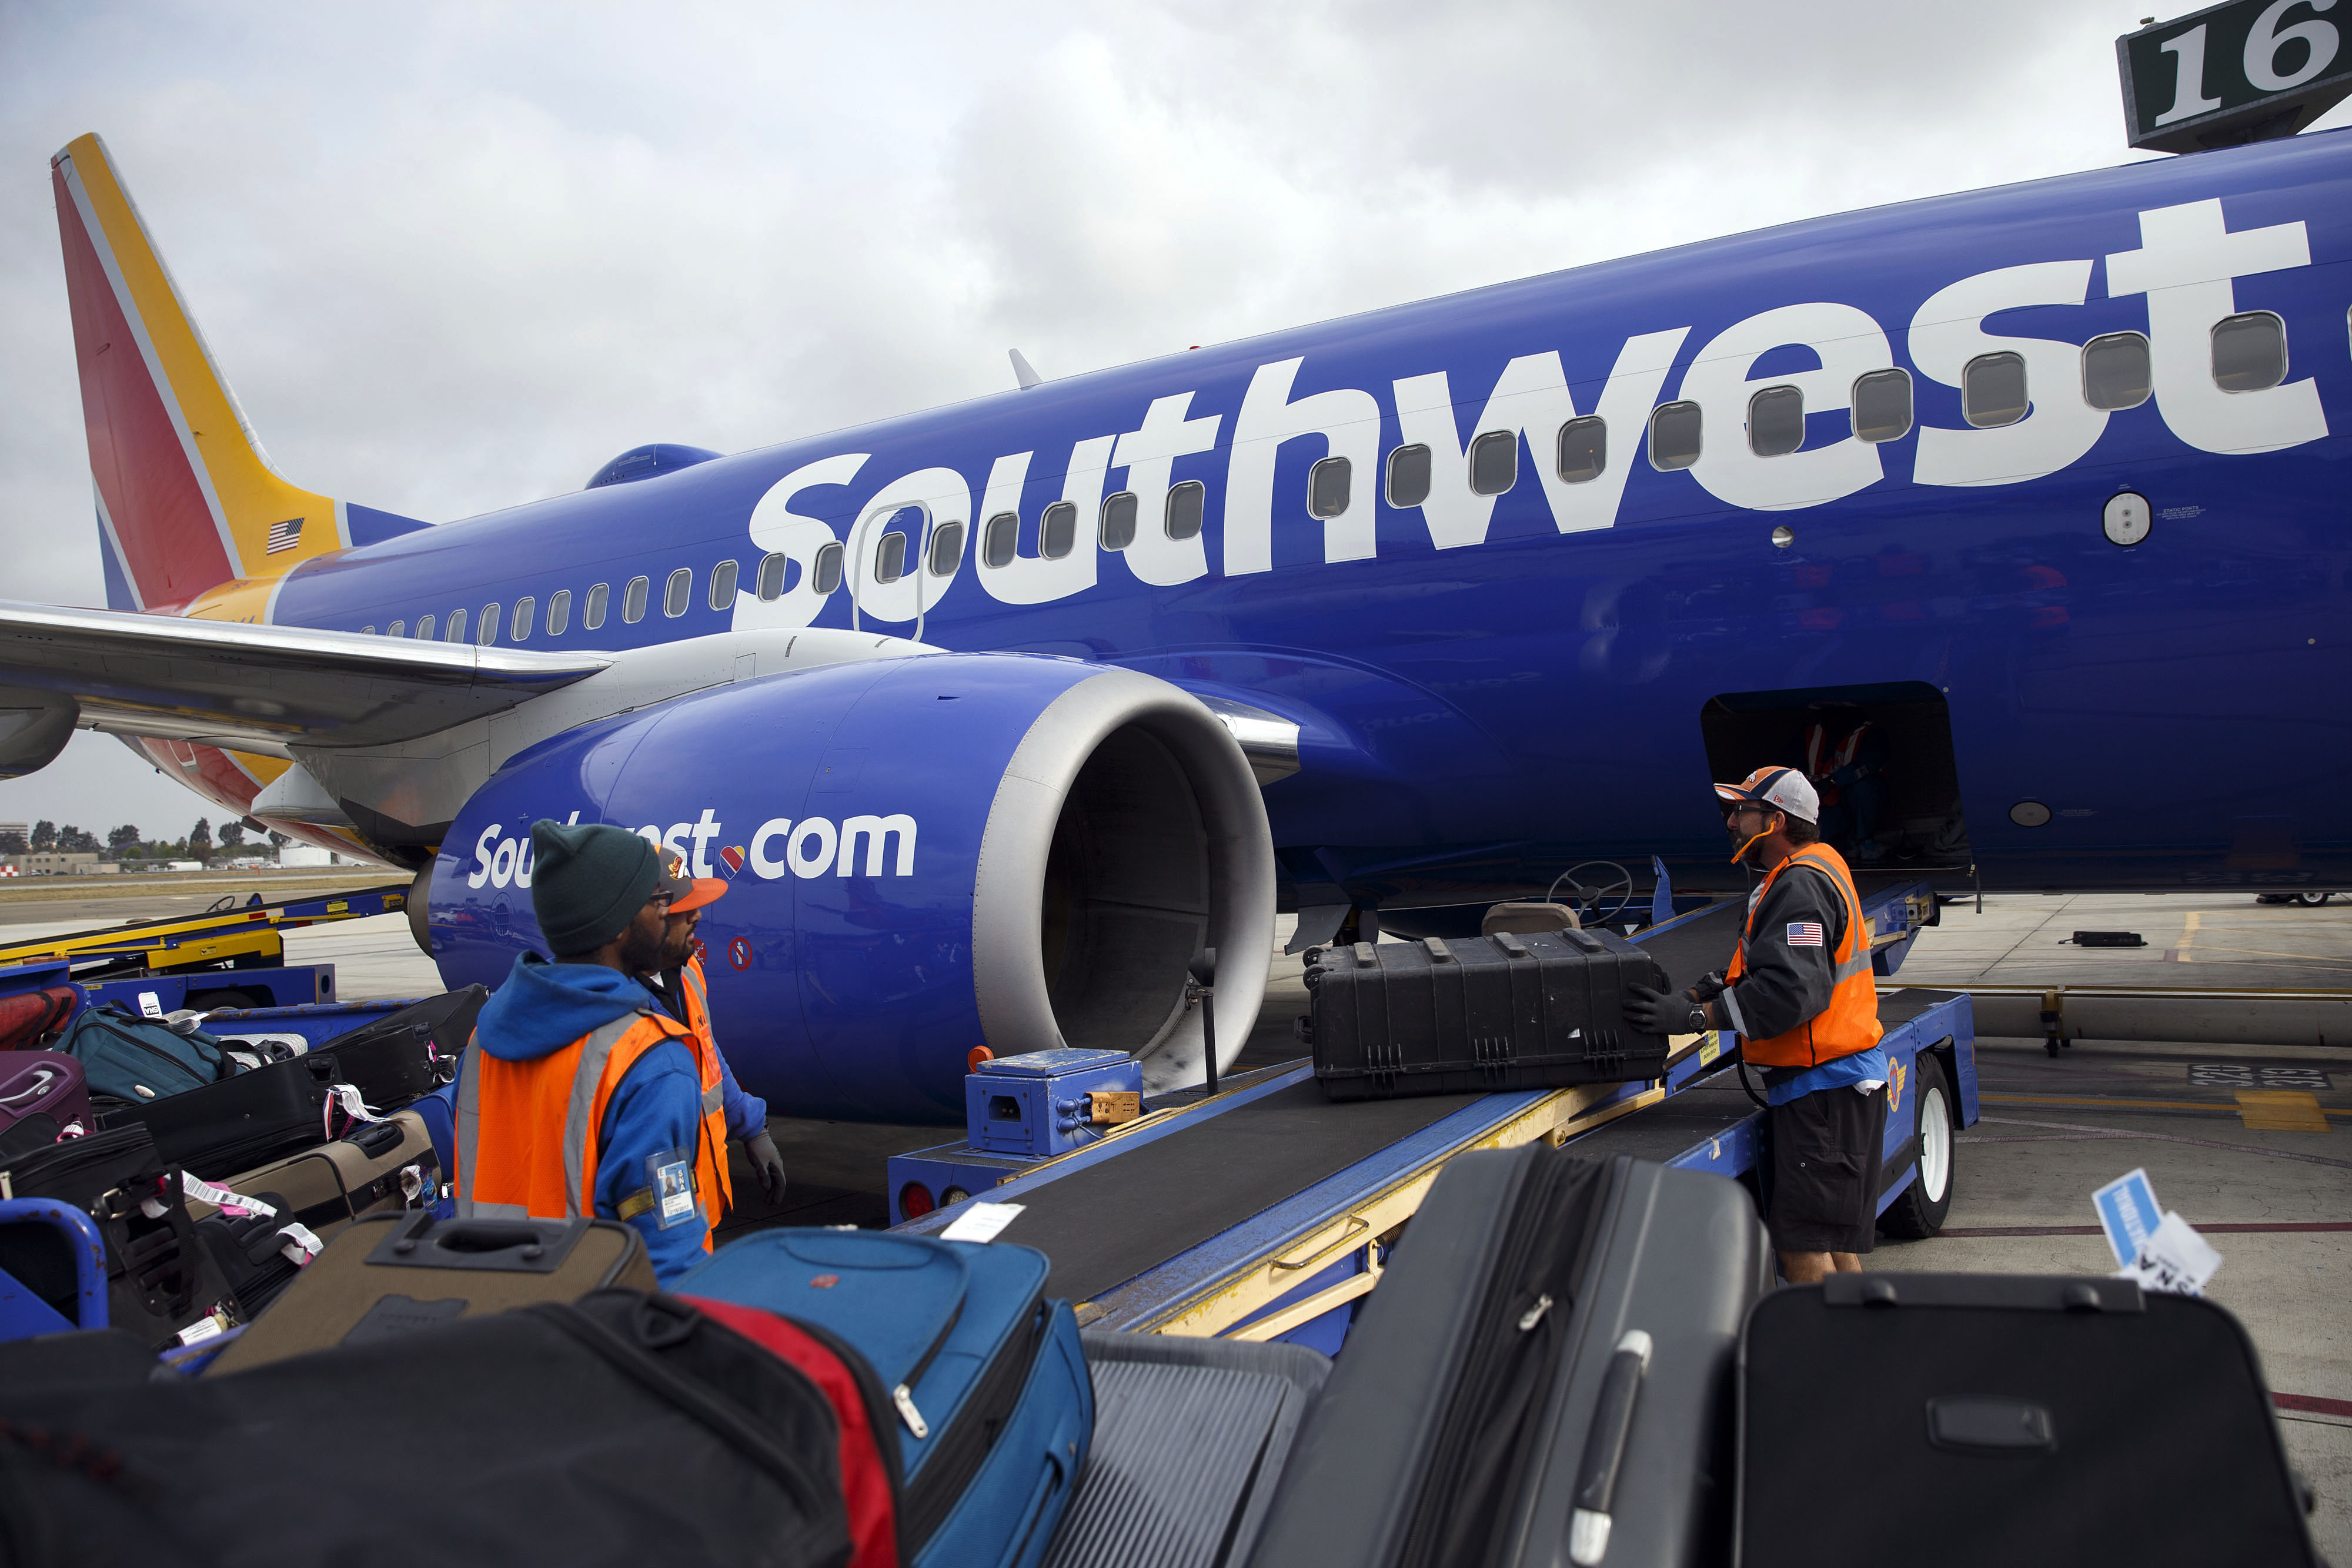 Re: Southwest Airlines 150 Seat 737-700 Replacement Question, Status? 